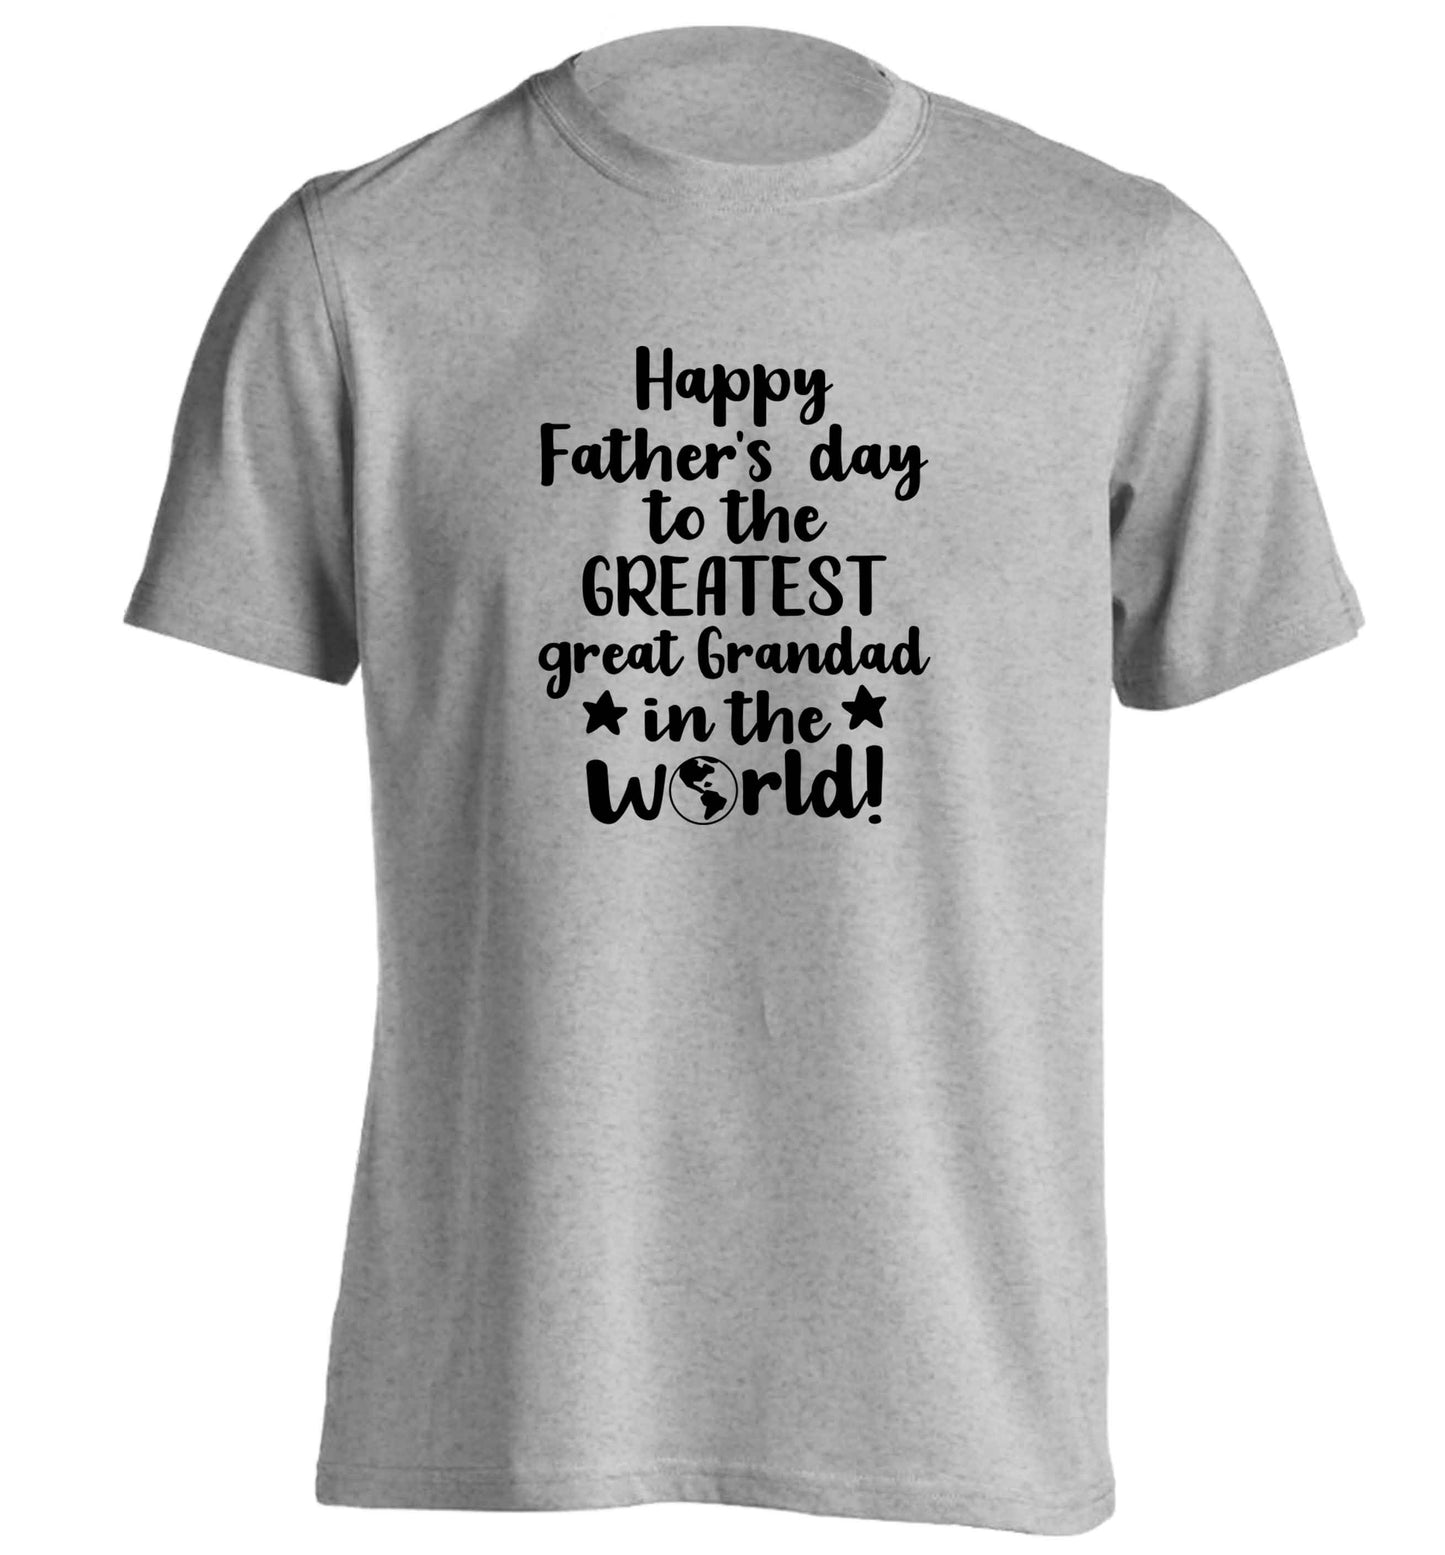 Happy Father's day to the greatest great grandad in the world adults unisex grey Tshirt 2XL